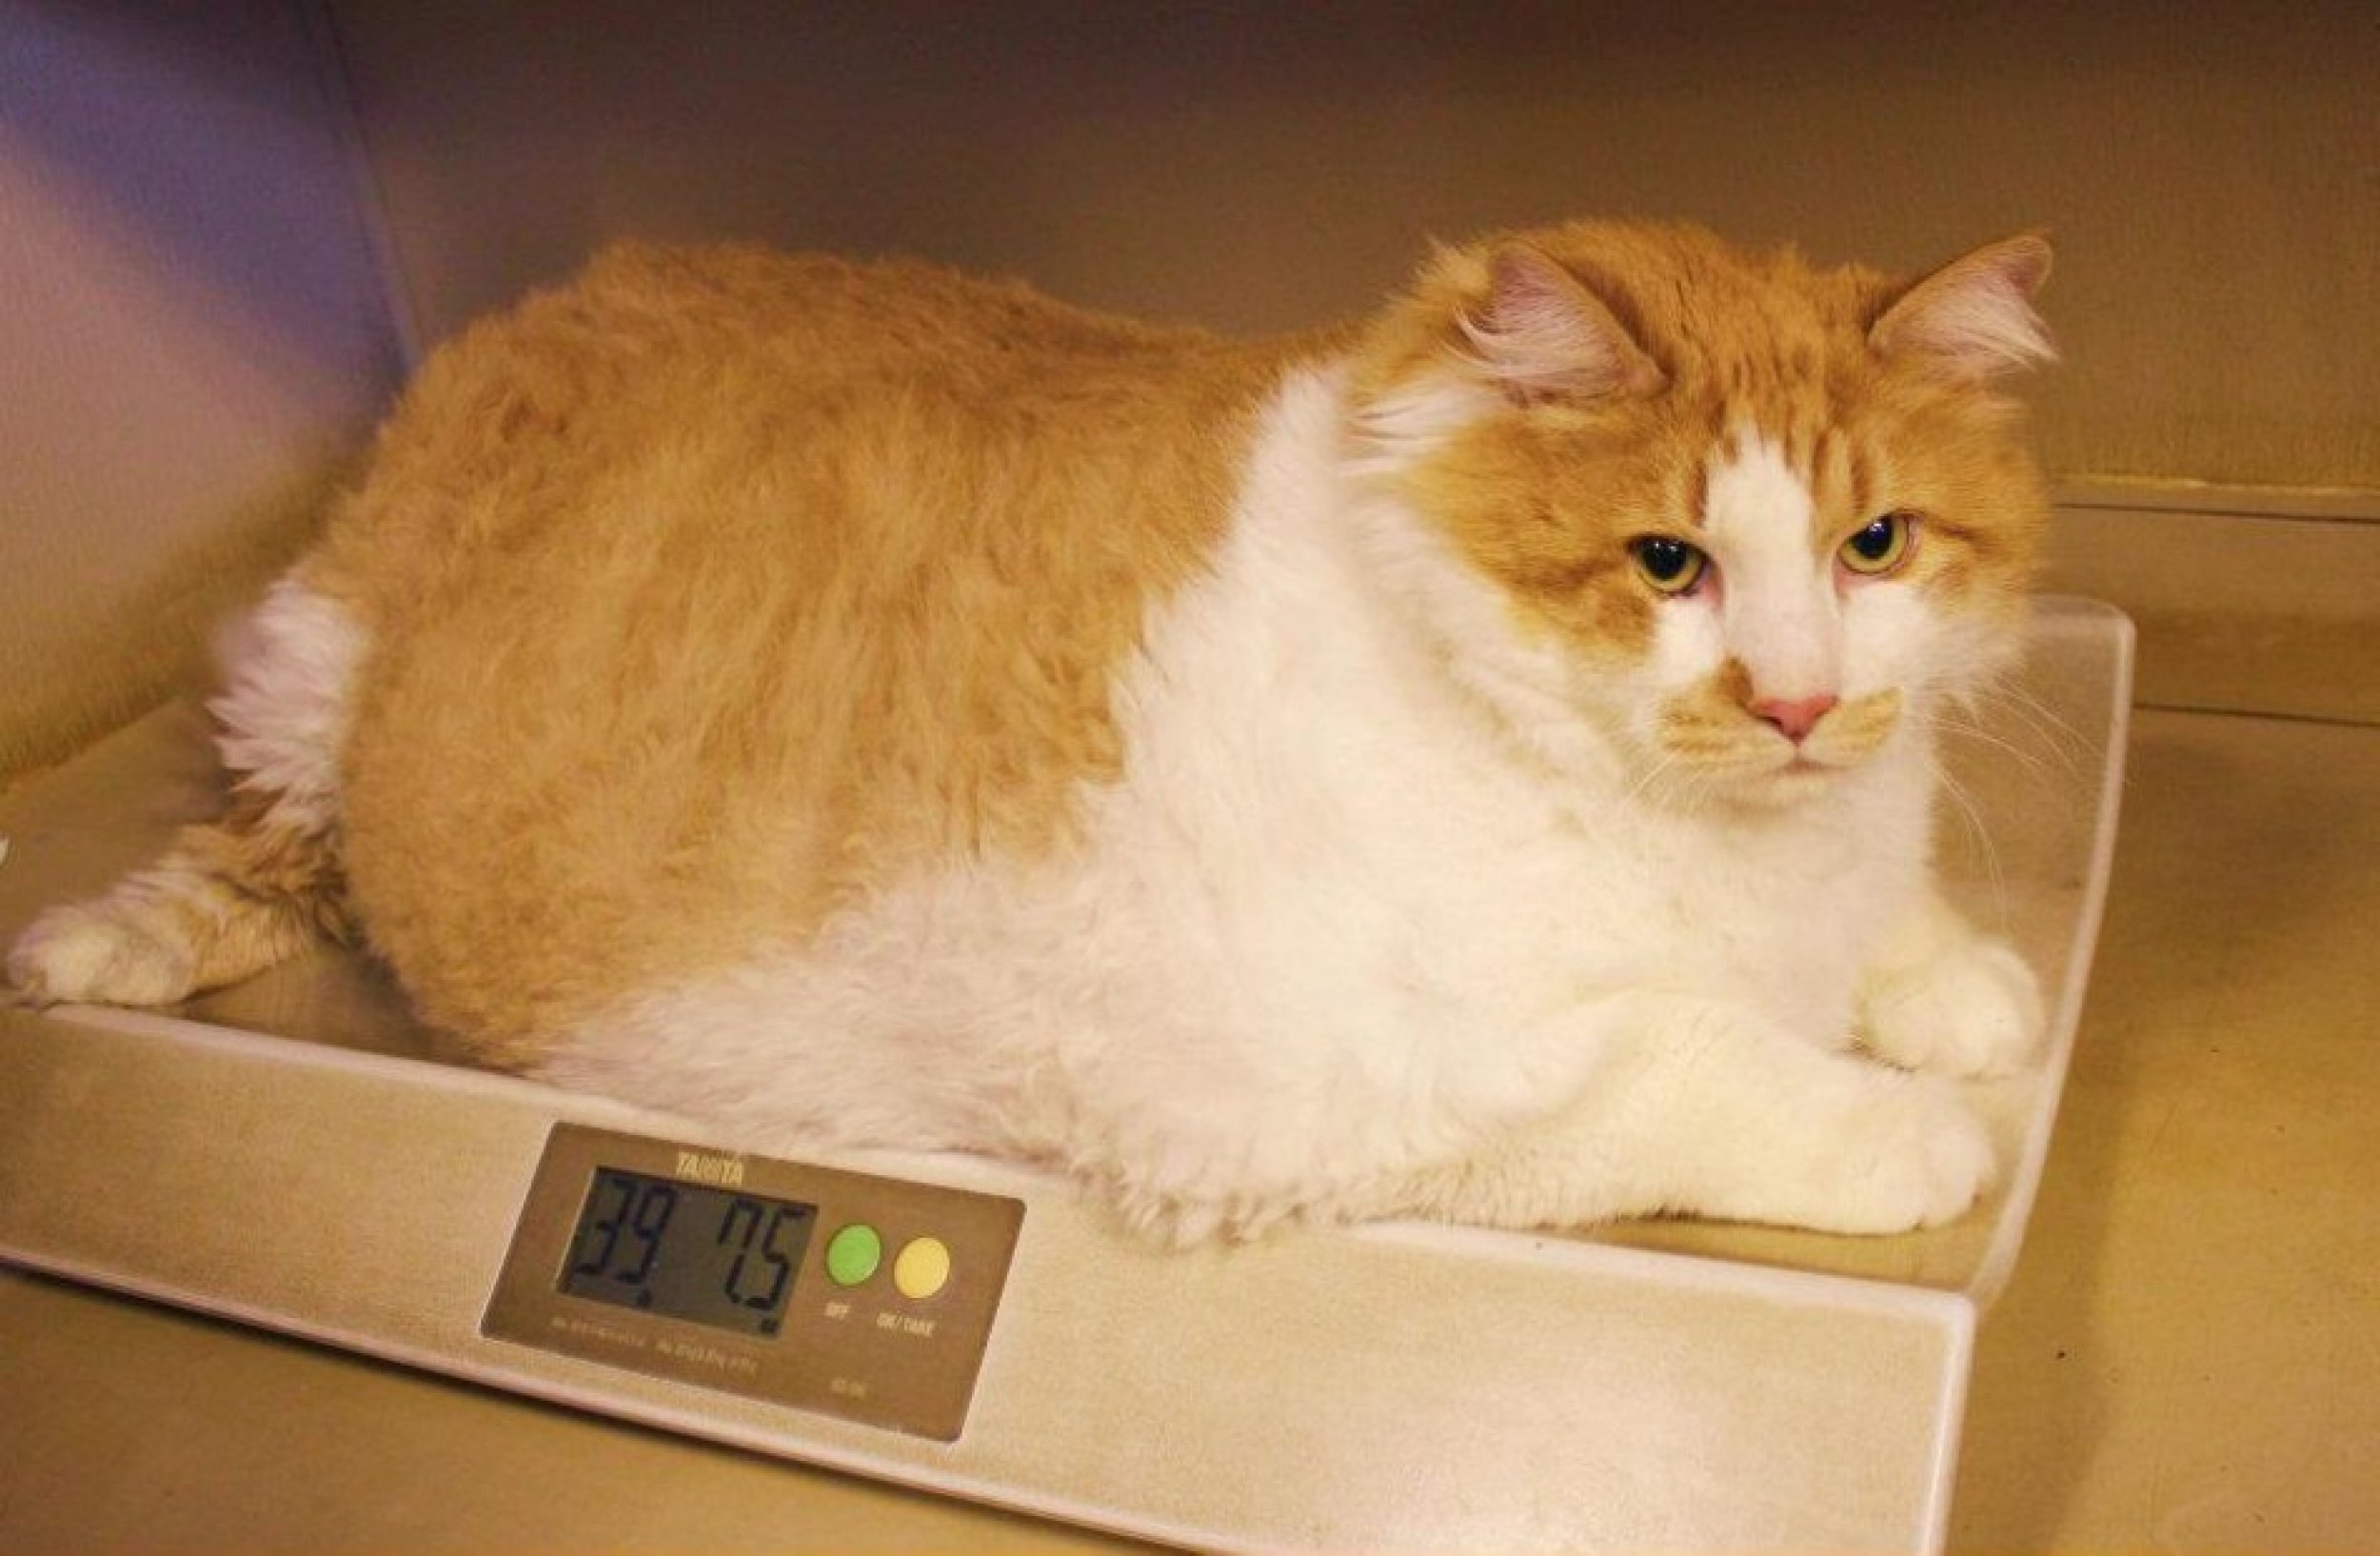 Garfield, 'World's Fattest Cat' At 40 Pounds, Finds Home IBTimes